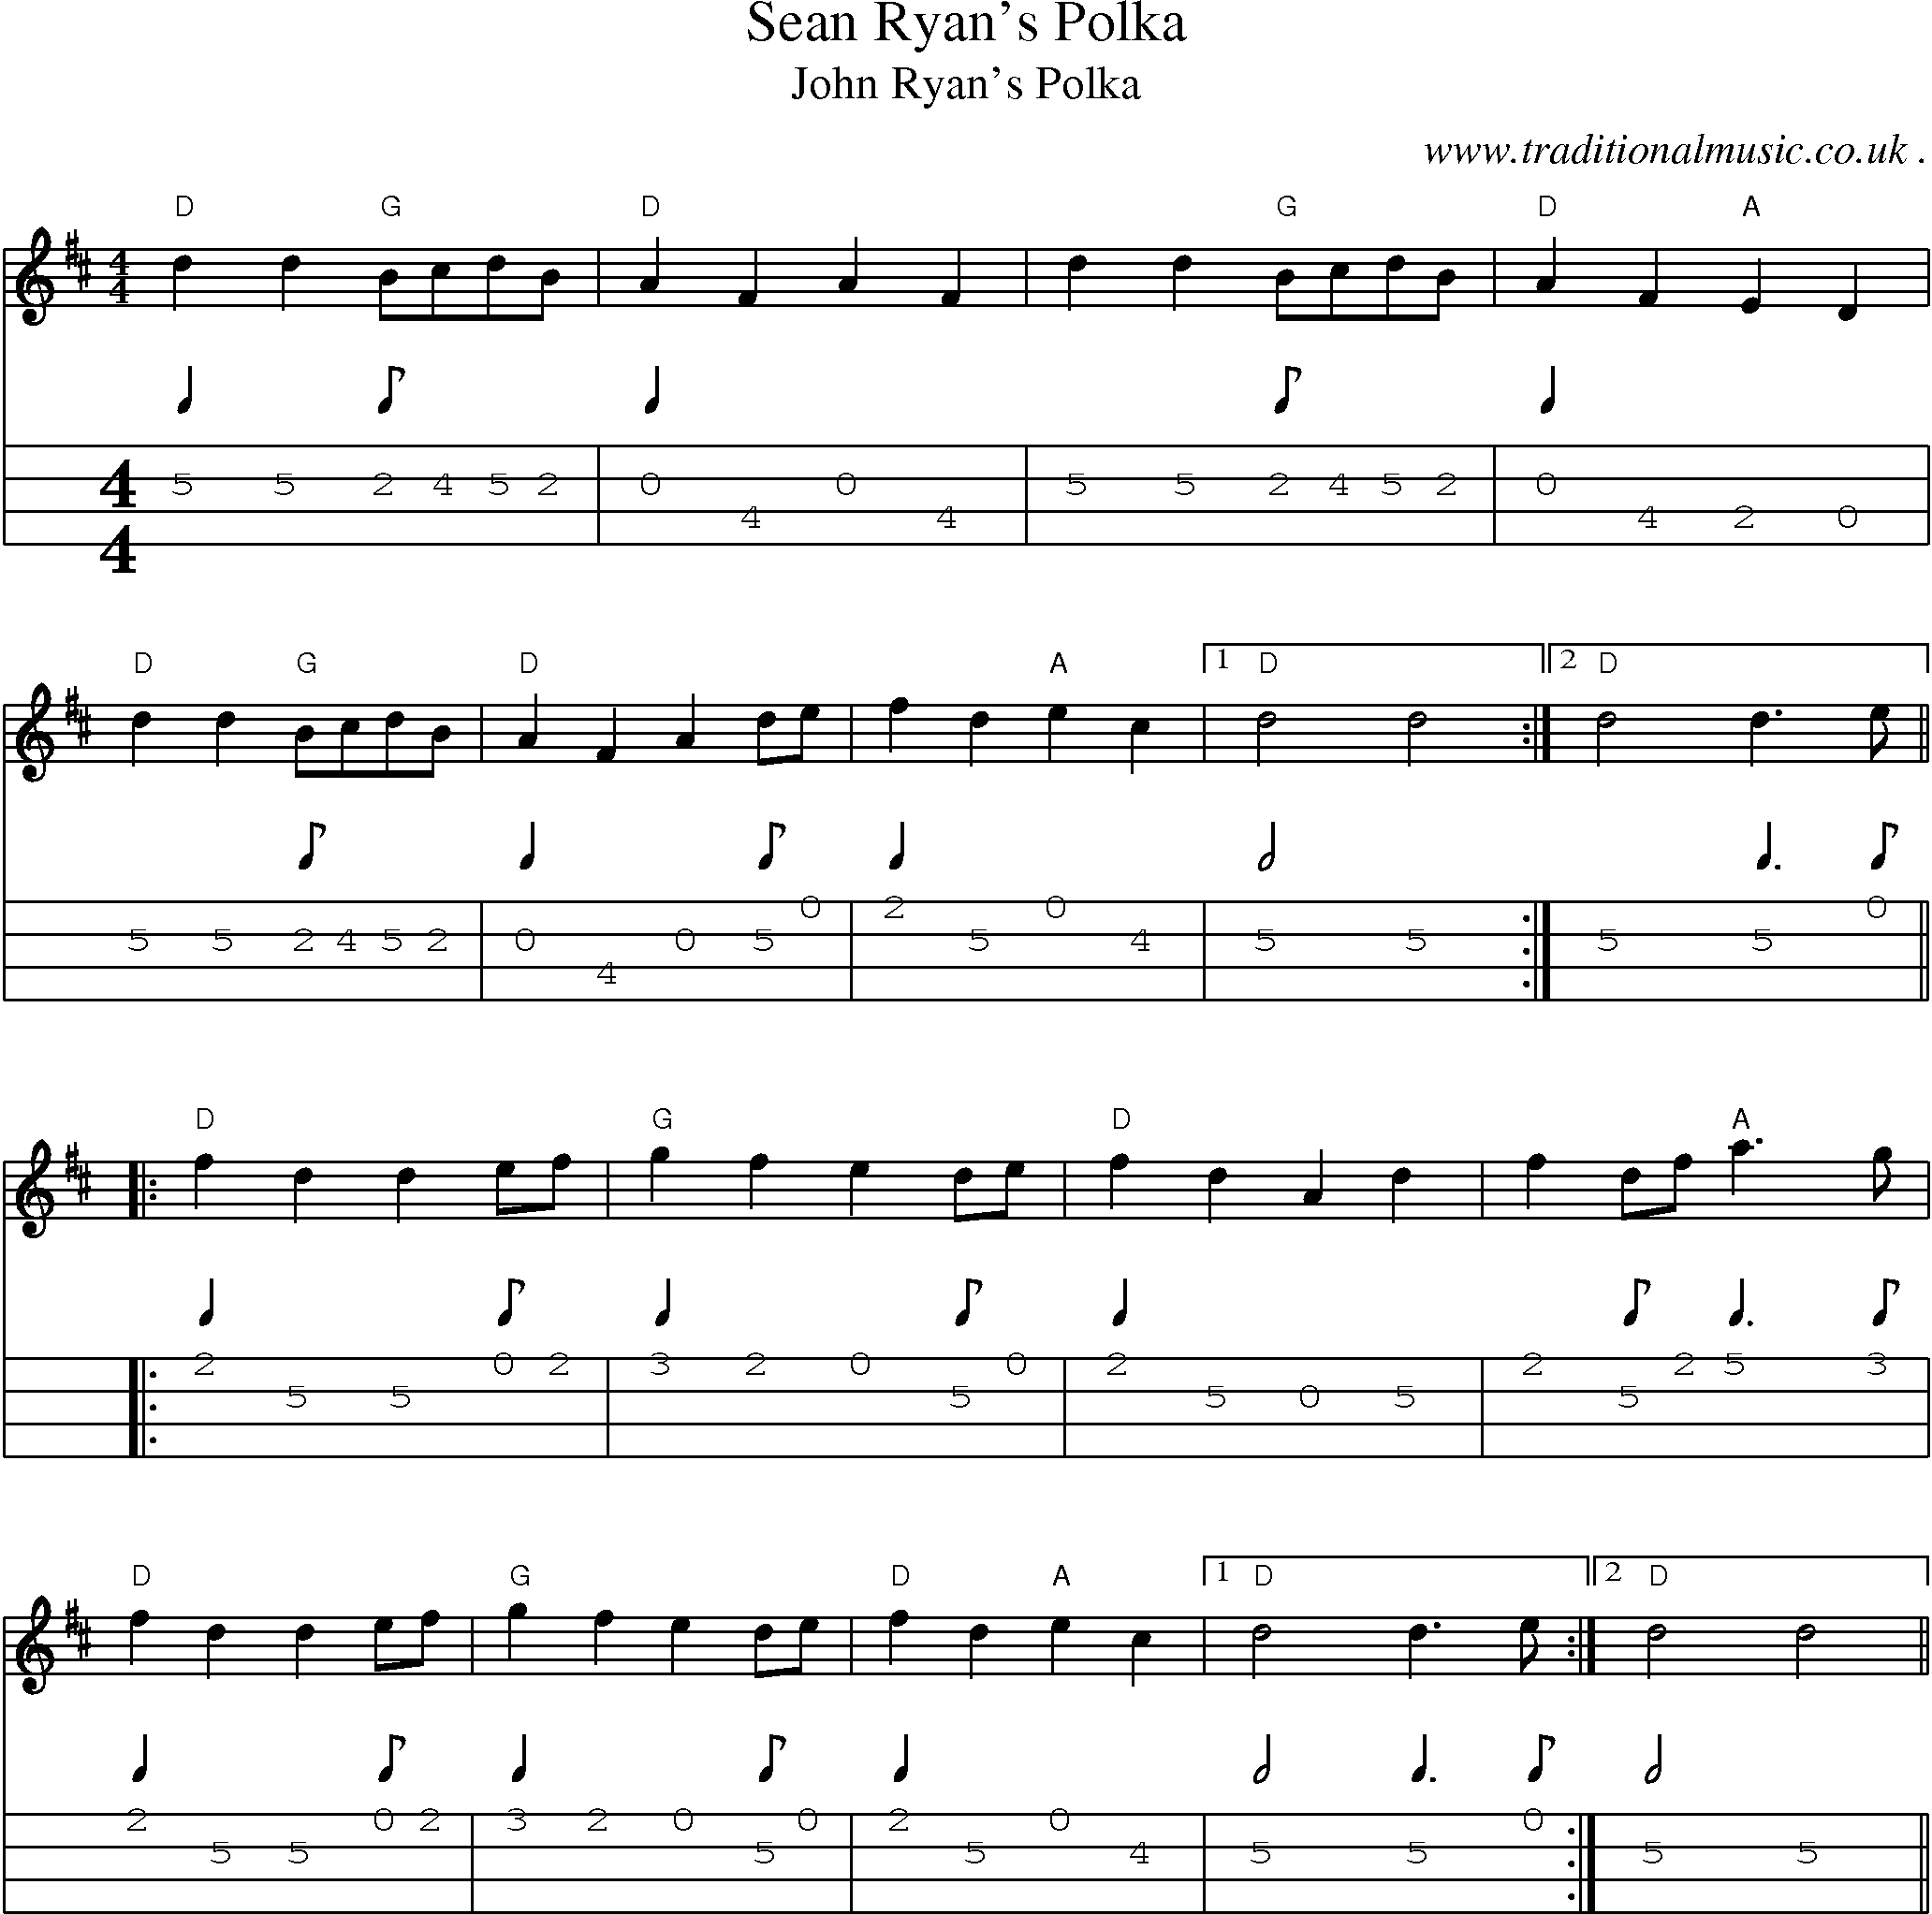 Music Score and Guitar Tabs for Sean Ryans Polka